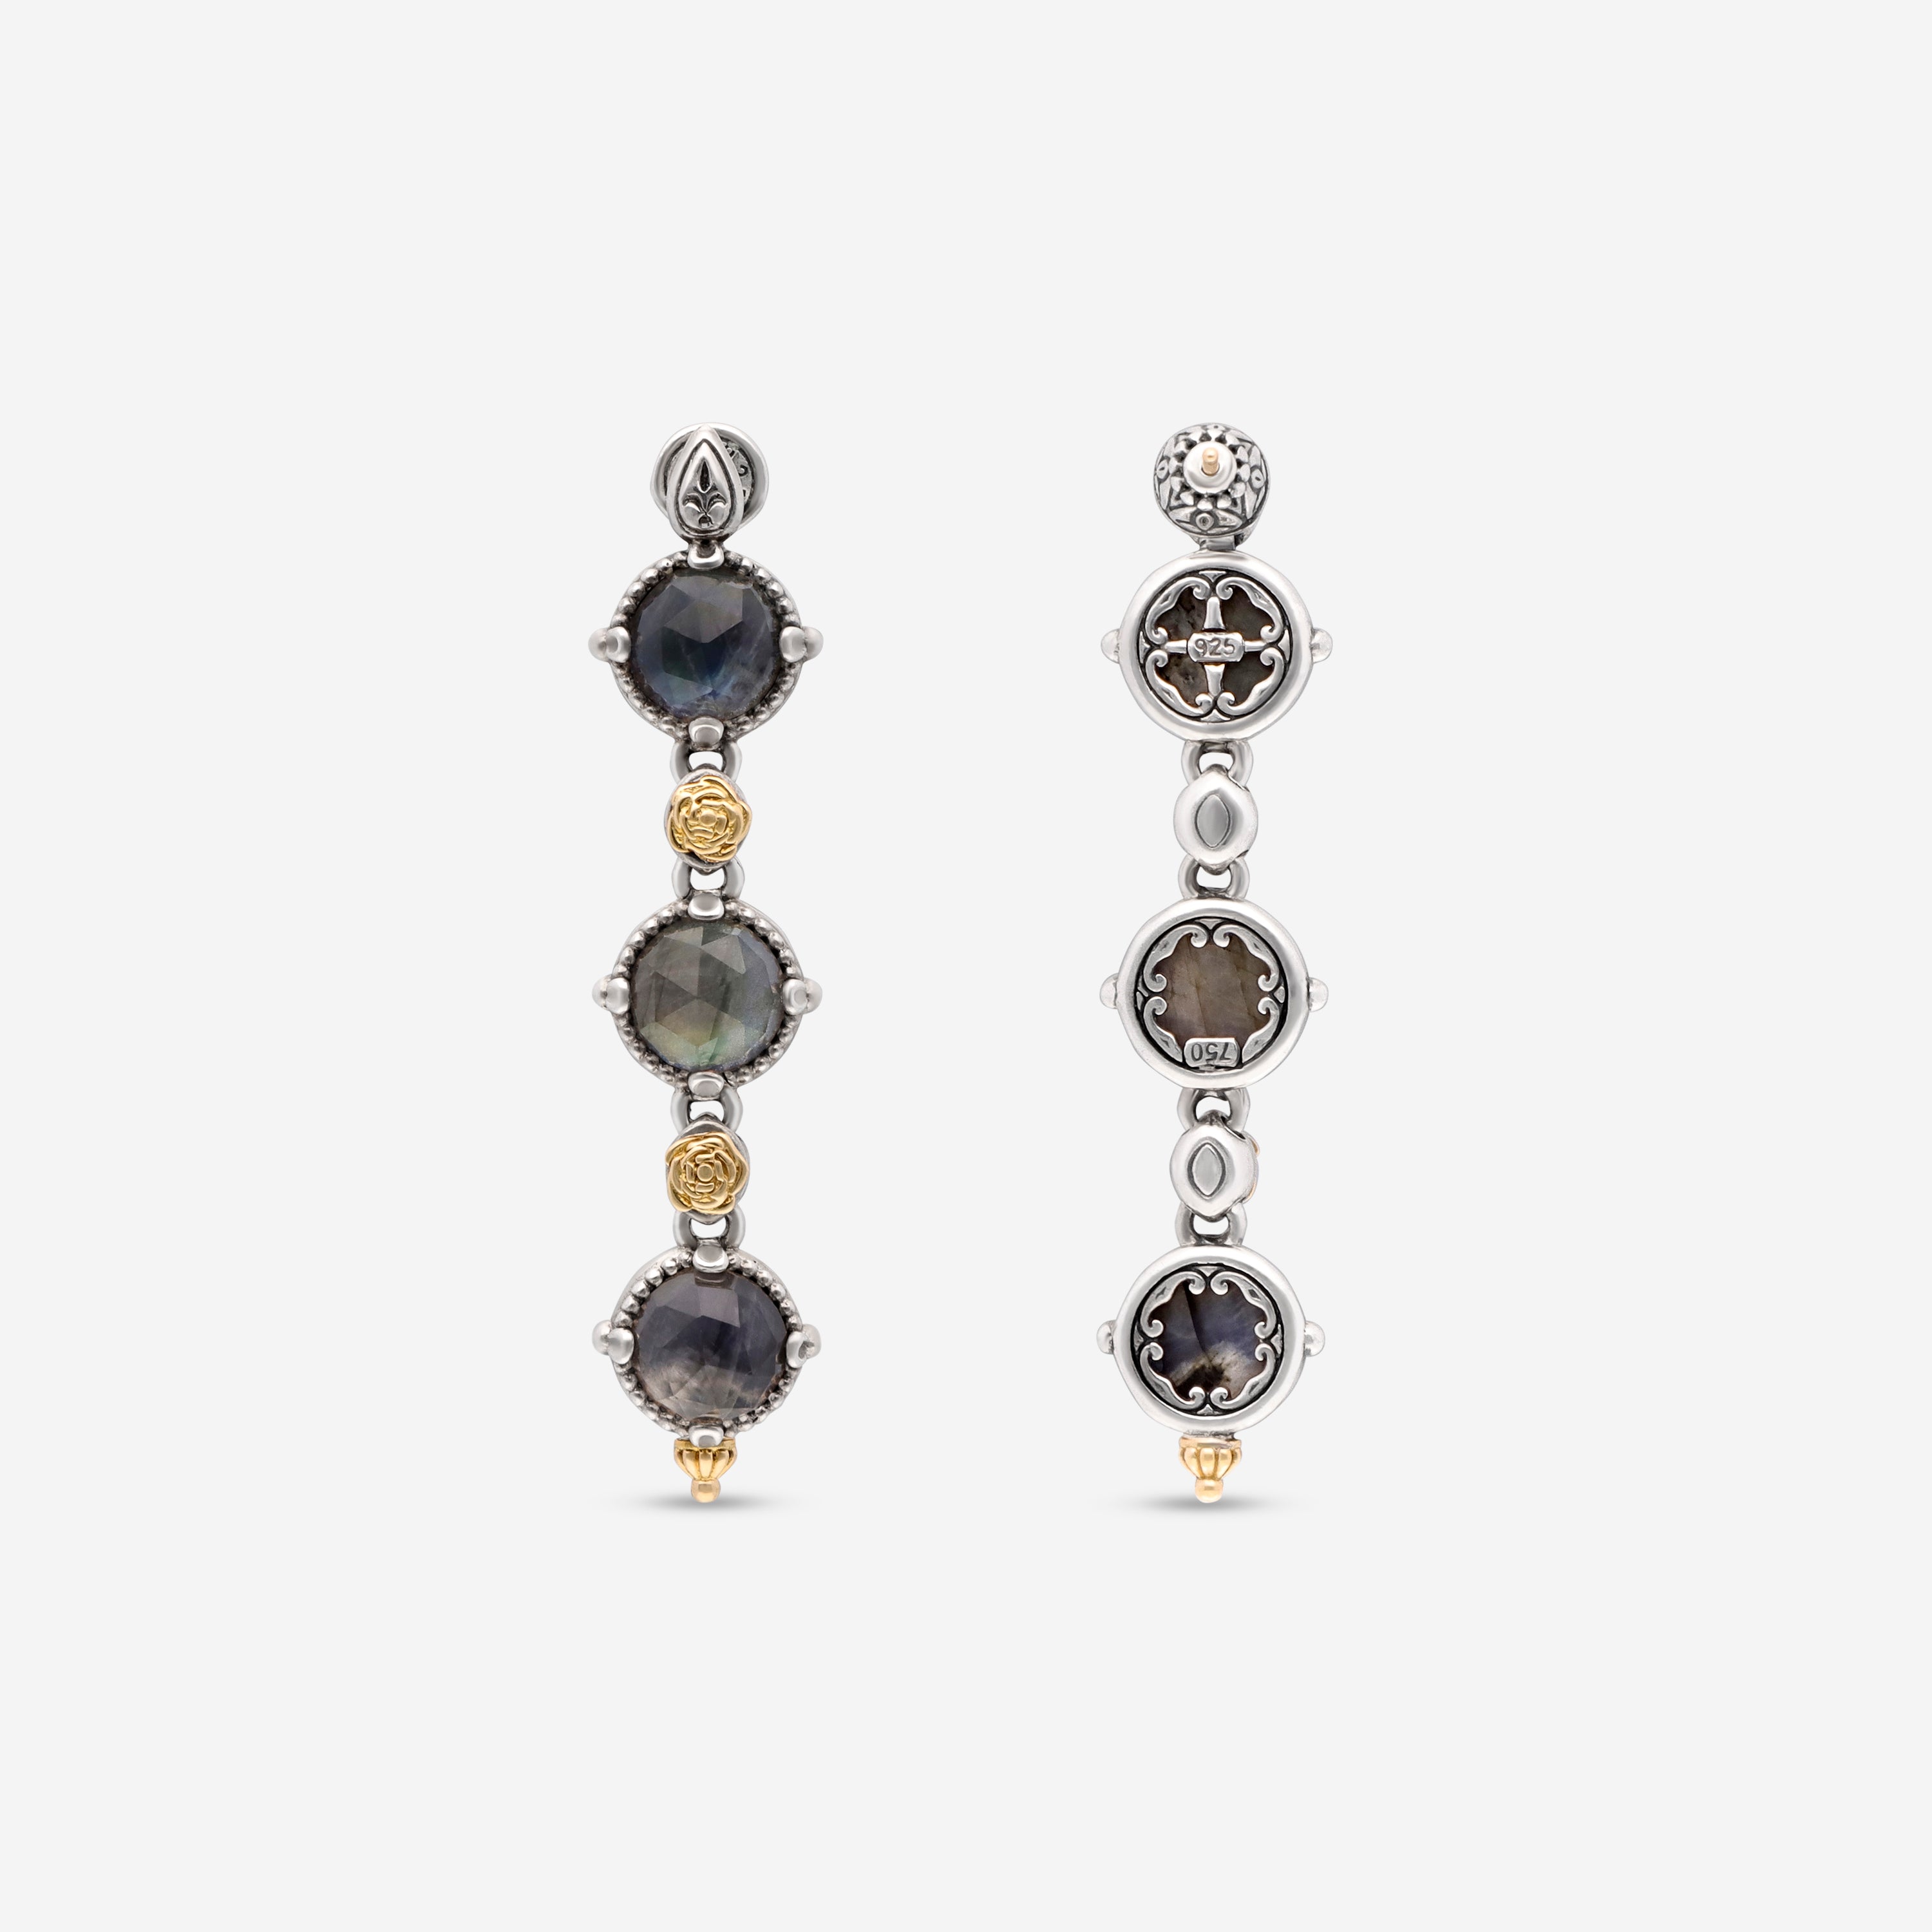 Konstantino Cassiopeia Sterling Silver and 18K Yellow Gold, Spectrolite Earrings SKMK3106-301